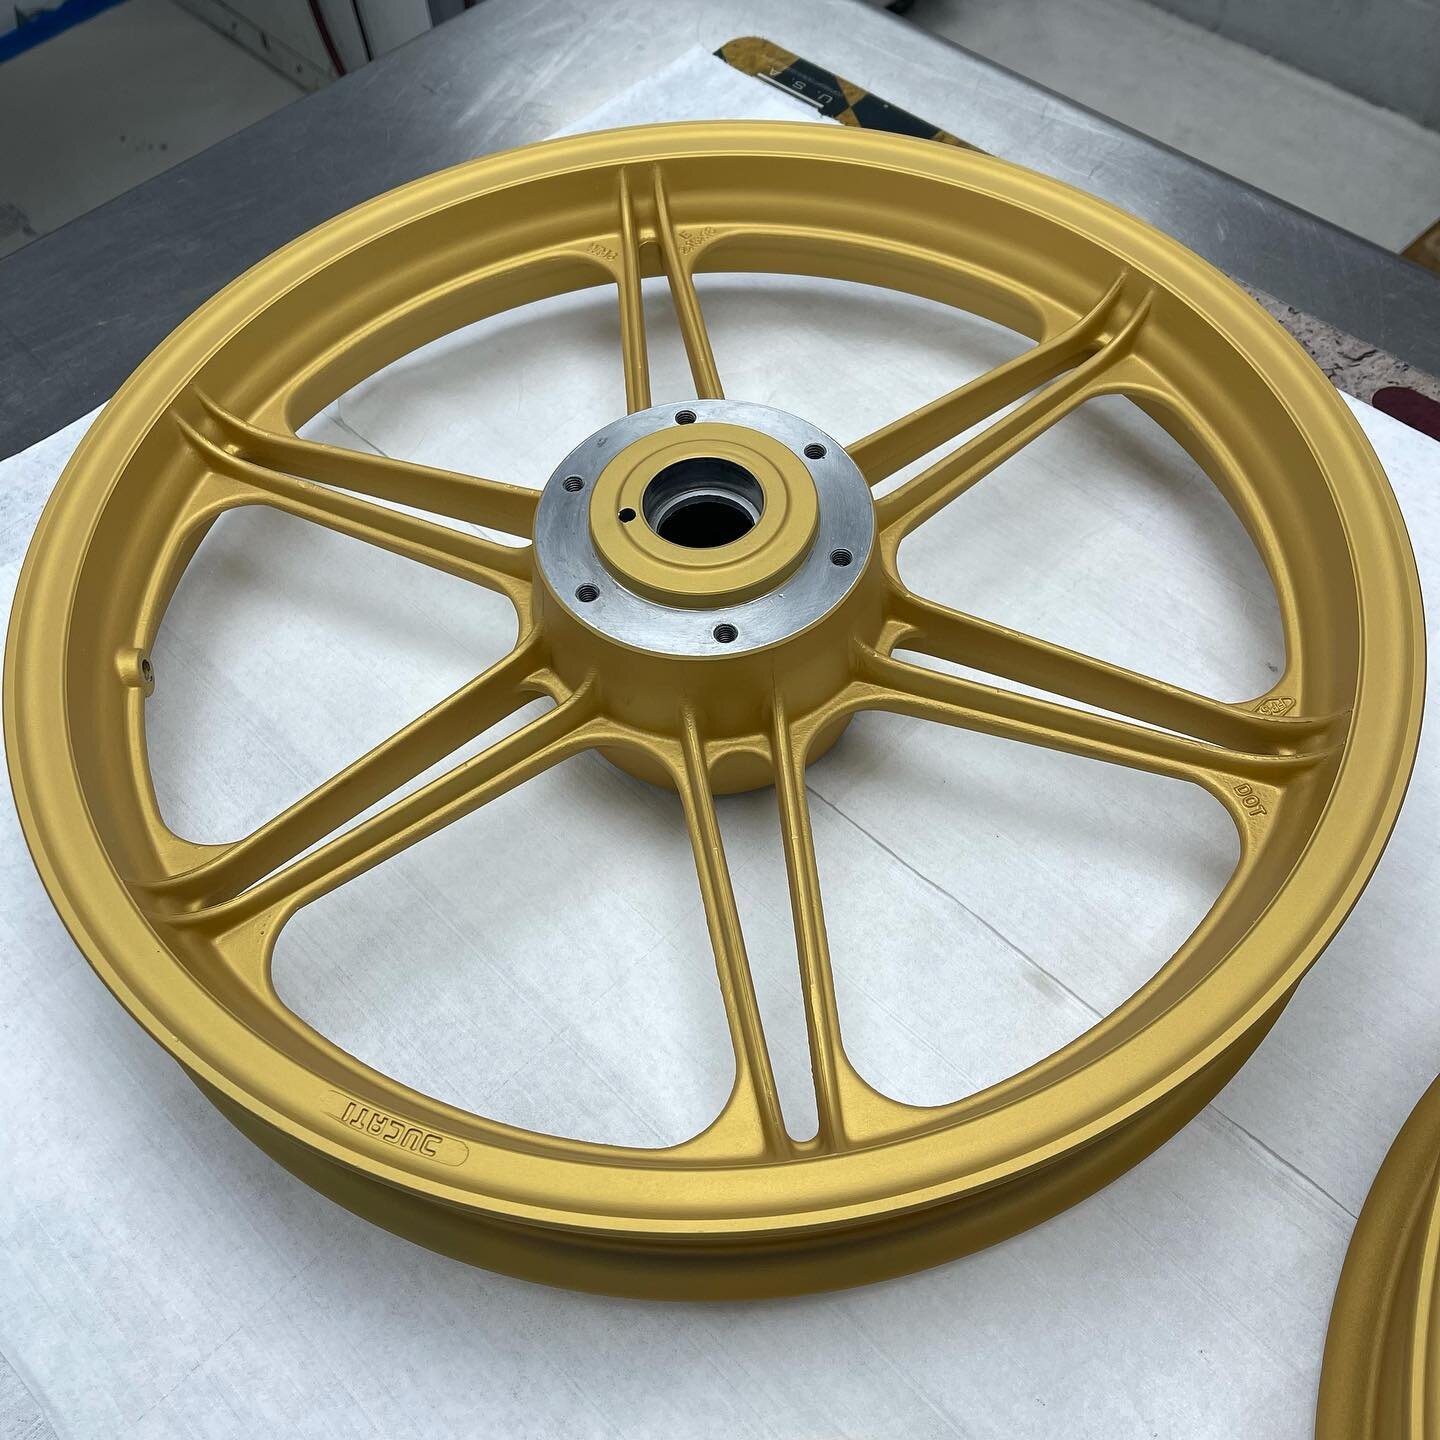 Ducati Gold Wheels&hellip;
Working on June &amp; July backlog and haven&rsquo;t had time to take pics &amp; post. 
.
.
#motorcycle #ducati #wheels #cerakote #cerakotecertified #doitright #beaboutit #marylandcerakote